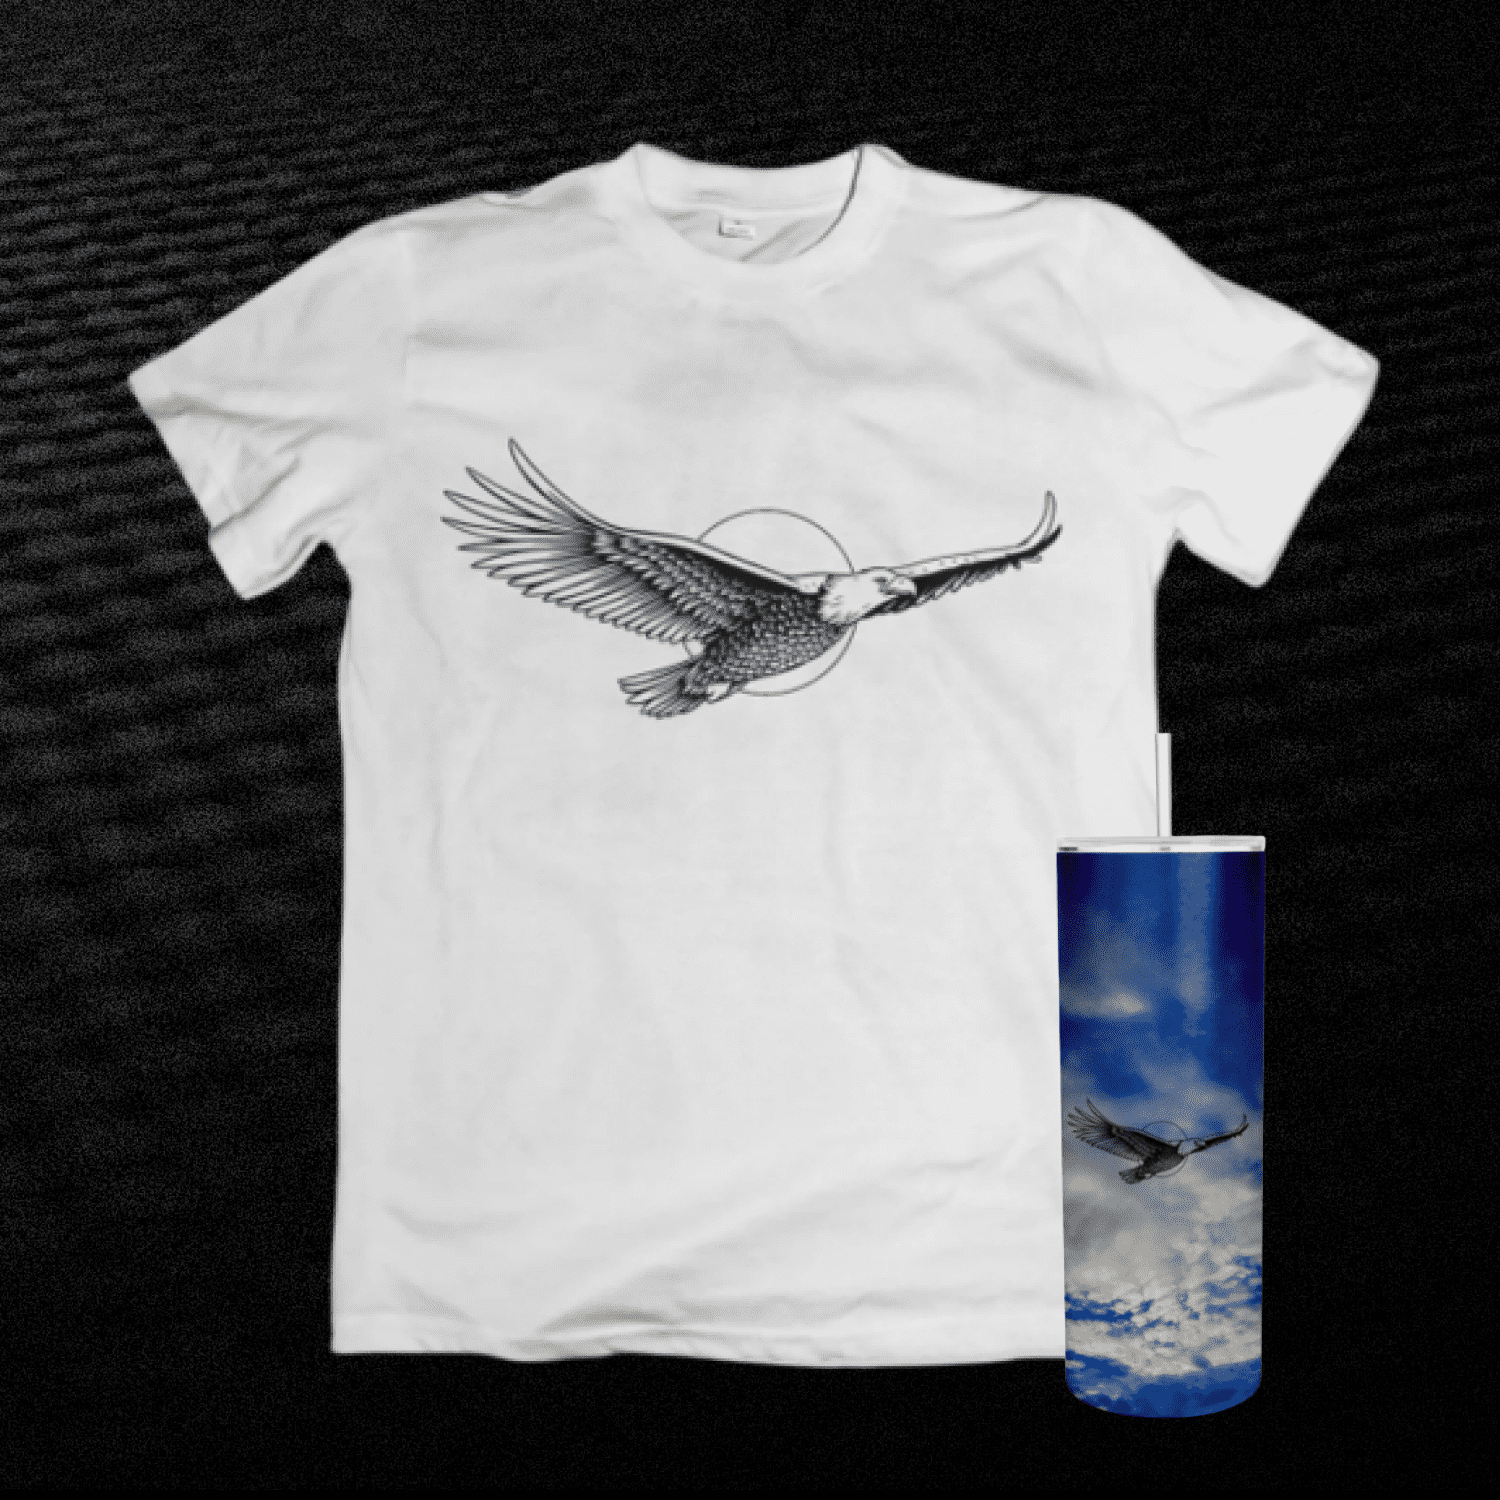 White t - shirt with a bird on it next to a blue can.